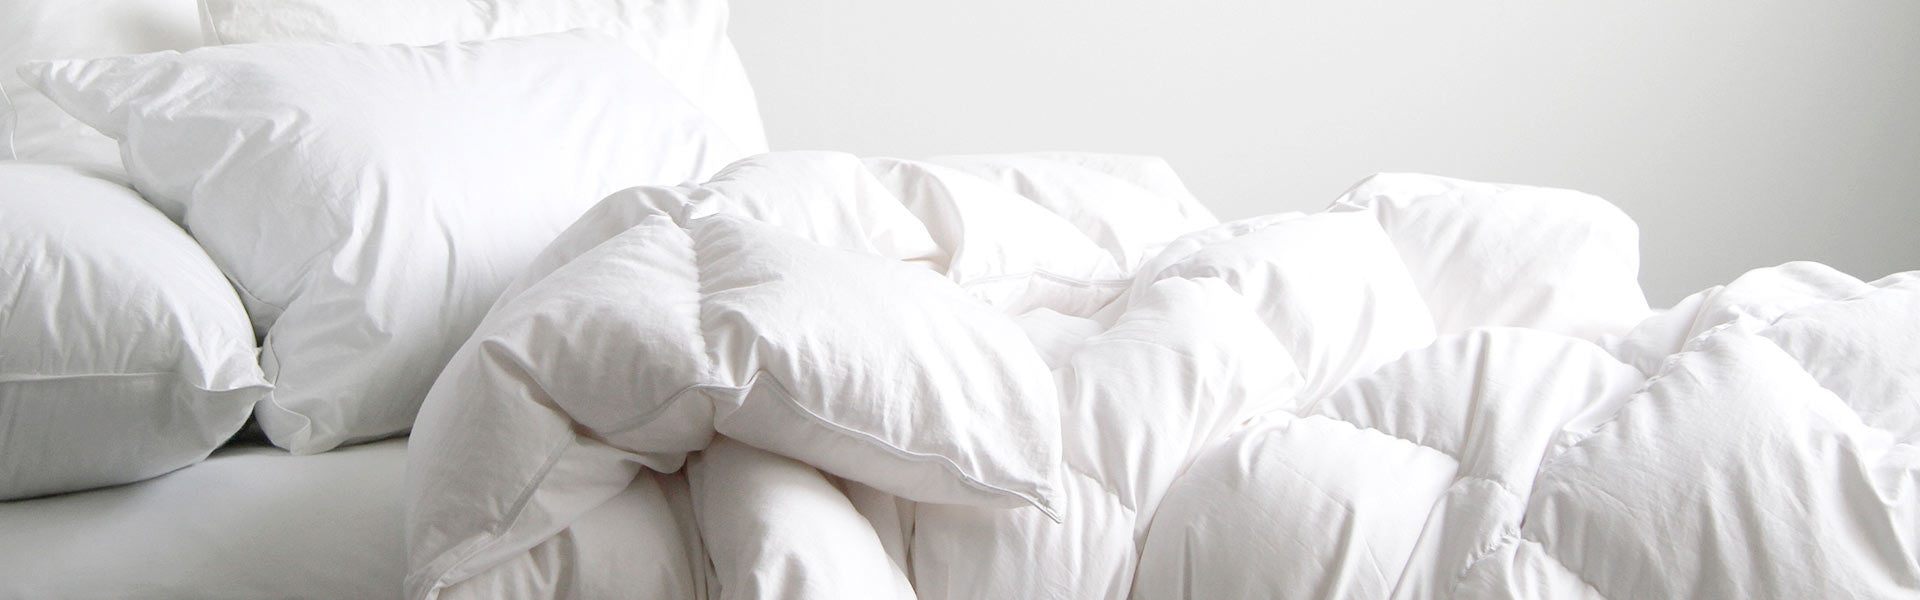 How We Make Our Pillows & Duvets